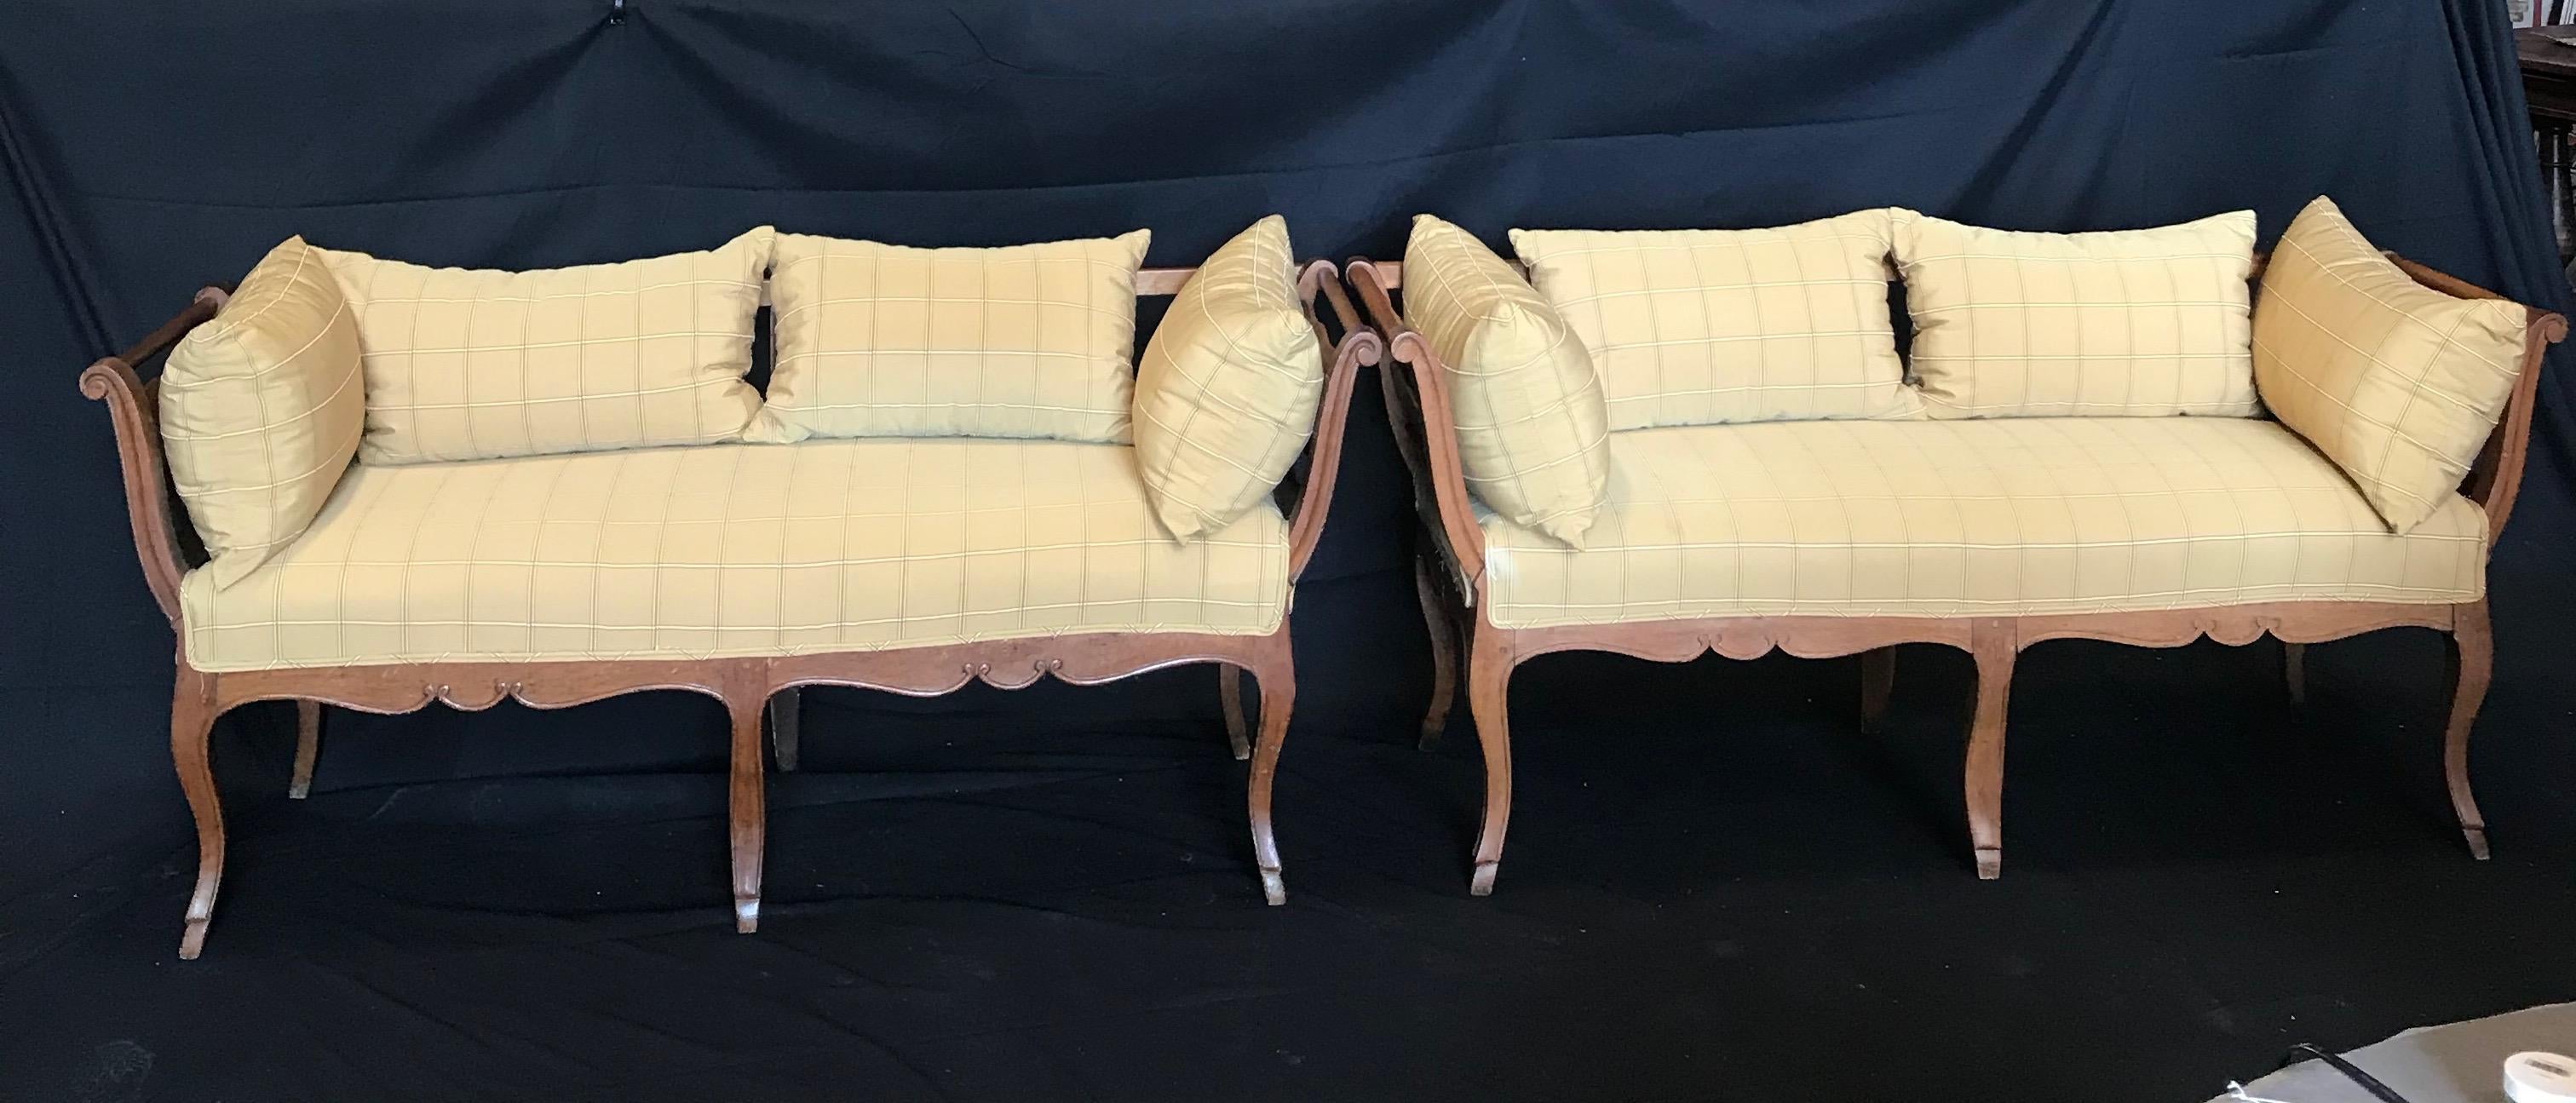 Stunning pair of 19th century French country Louis XV walnut settees having a provenance from the Westover Plantation in Virginia. The present family owned them for almost 100 years; originally from France. Upholstered in a silk neutral fabric.
 
